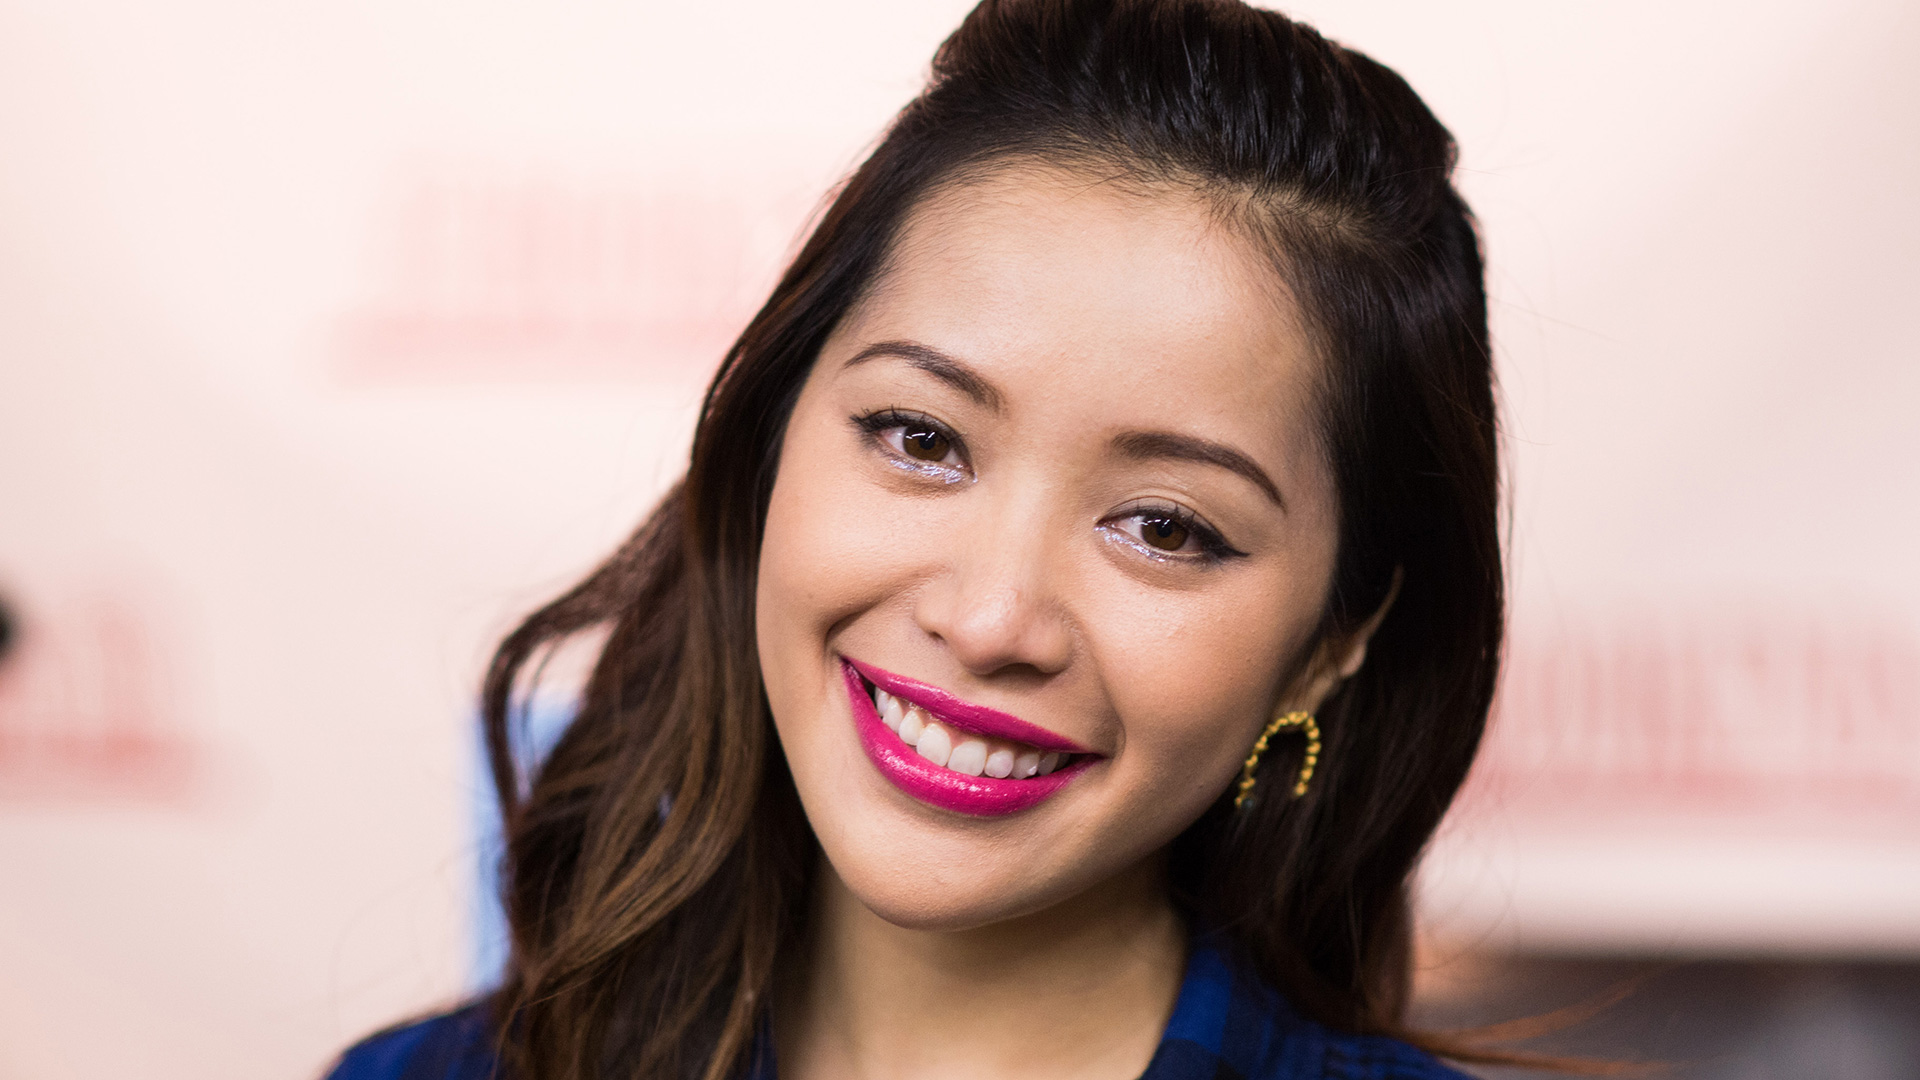 April  11, 1987: YouTube Beauty Pioneer Michelle Phan Was Born